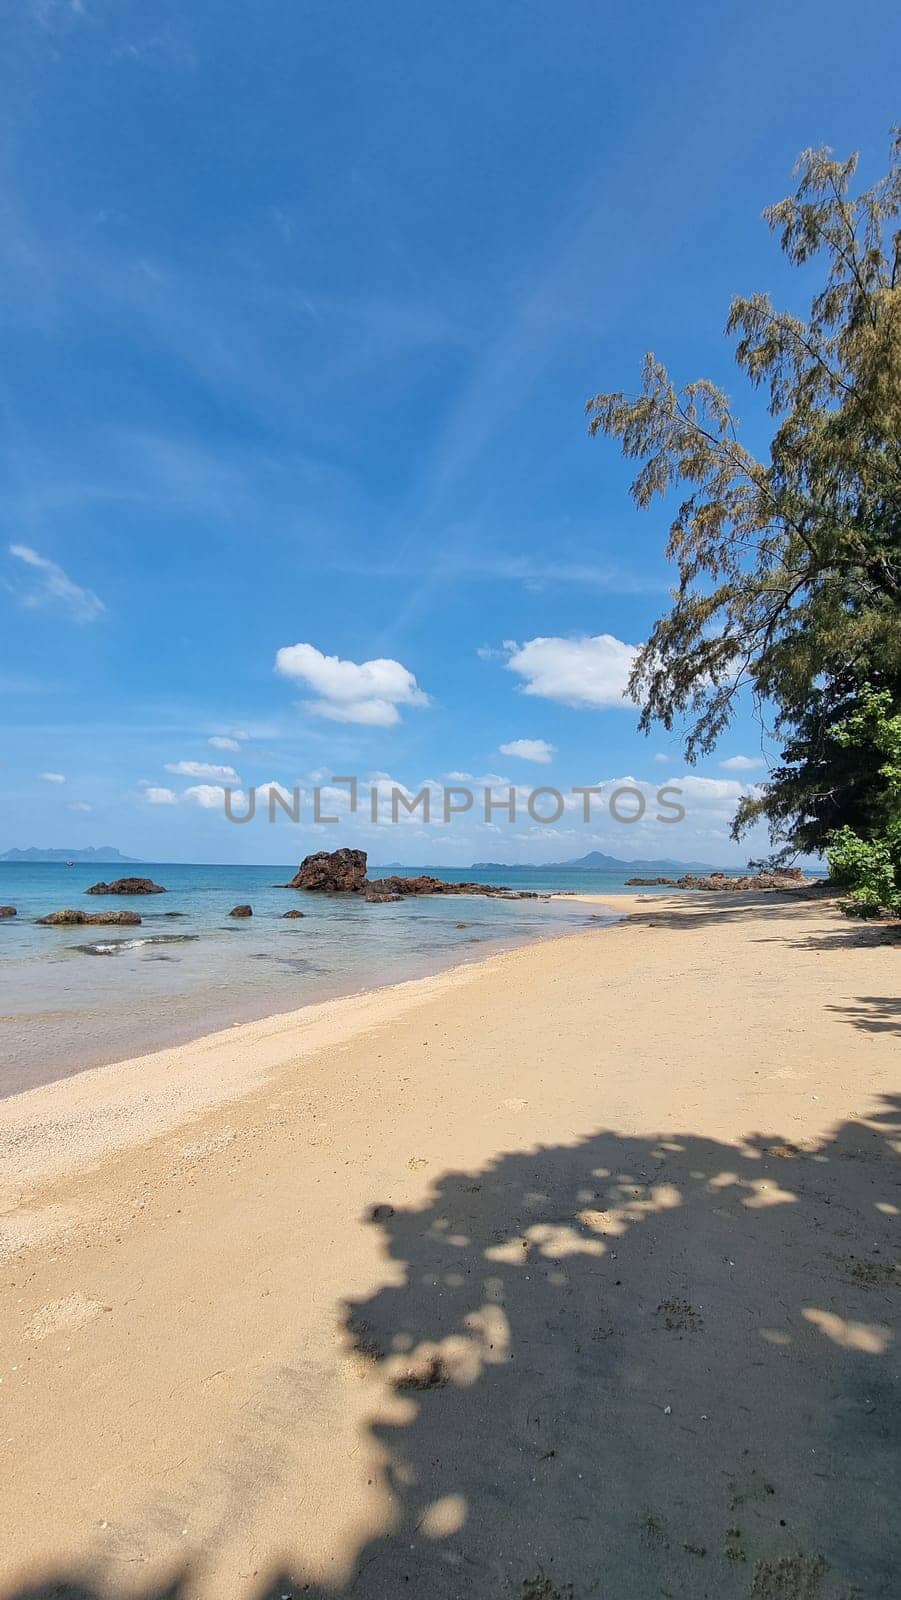 A tranquil sandy beach meets the vast ocean under a clear blue sky, creating a picturesque setting where waves gently kiss the shore by fokkebok